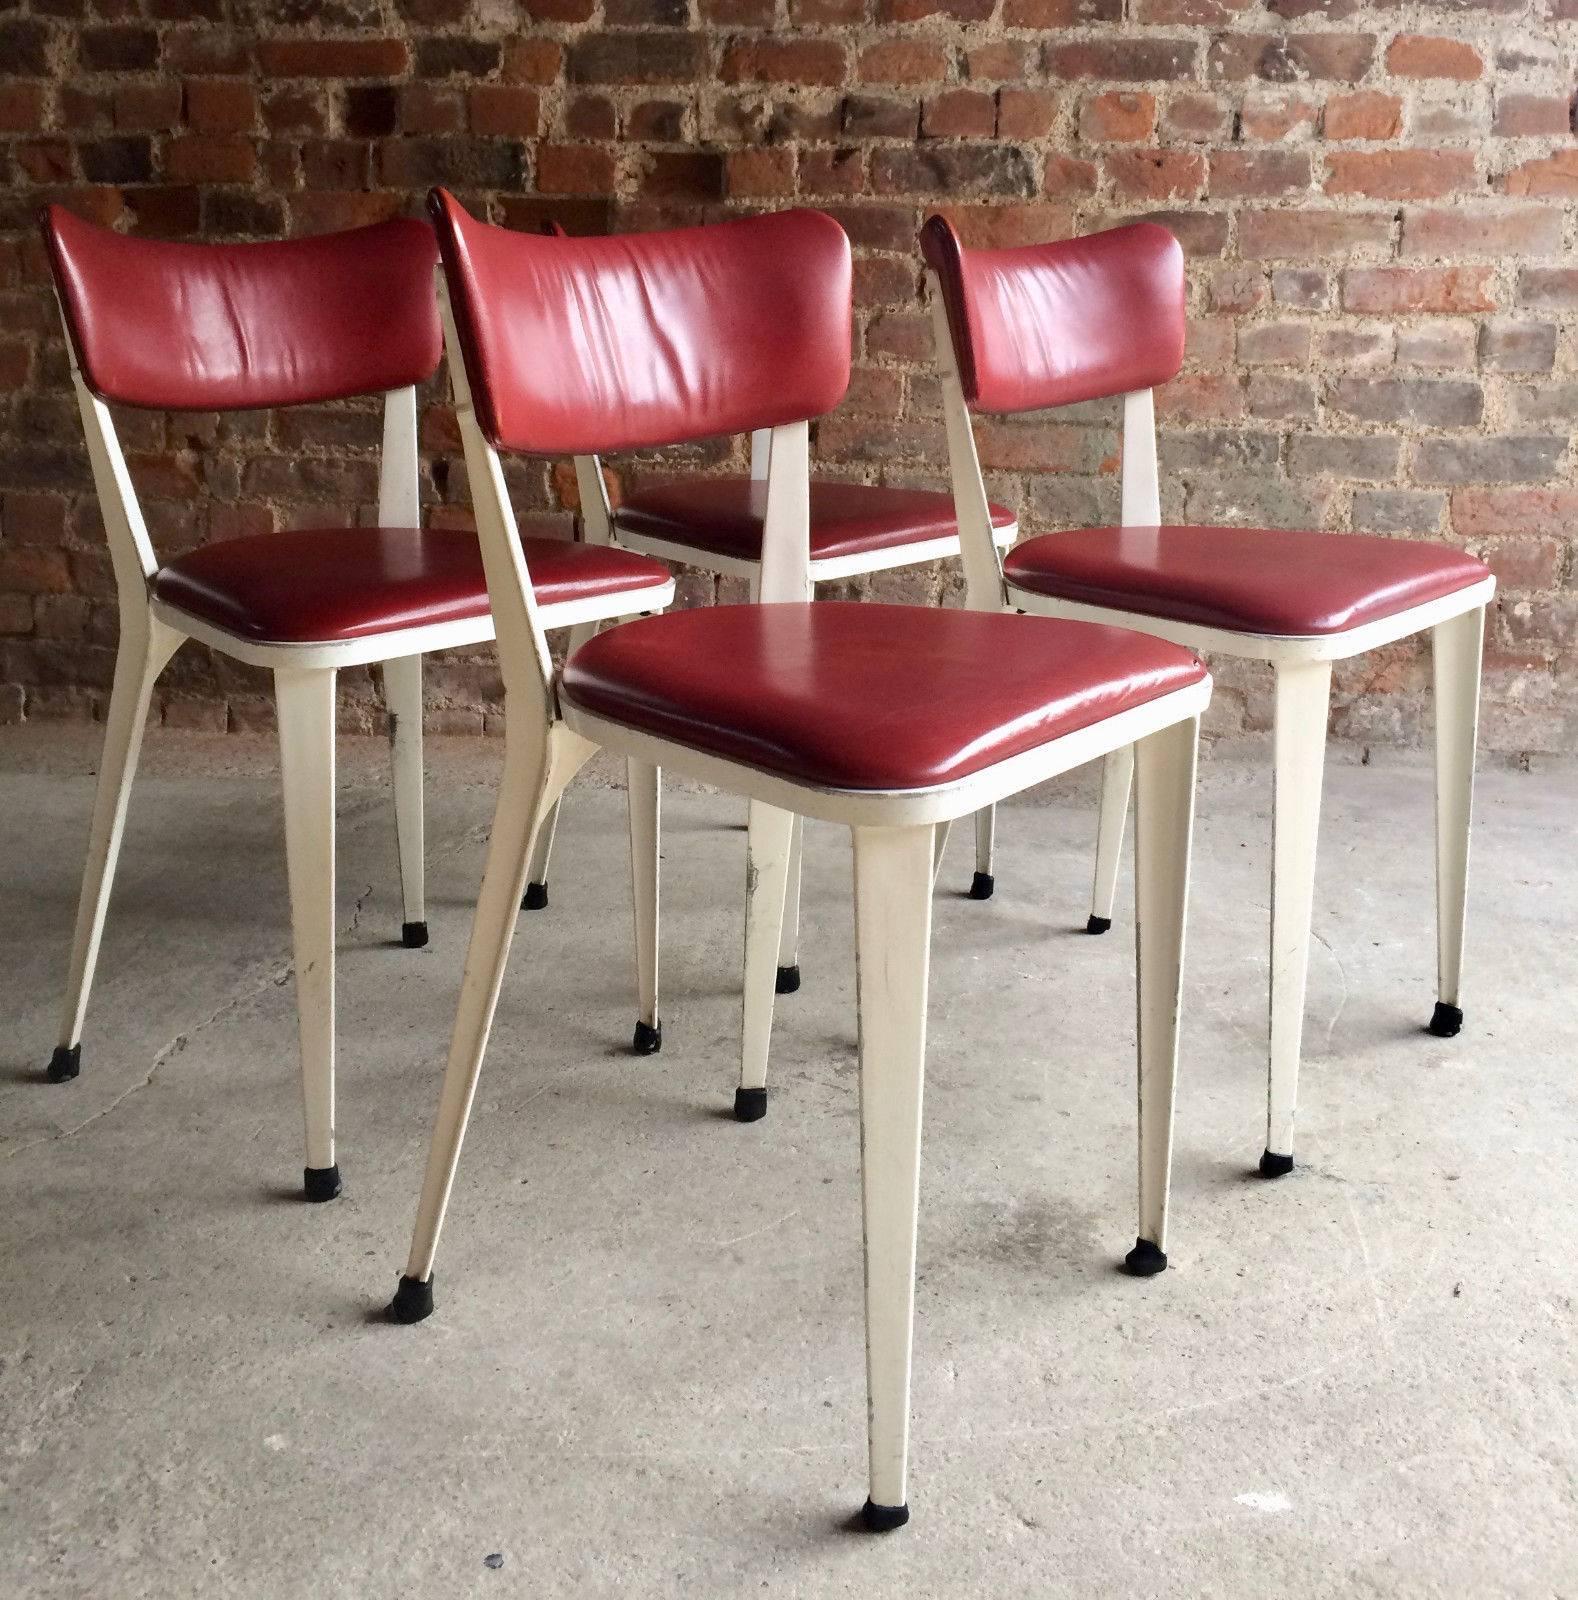 A fabulous set of four original 1950s Ernest Race BA3 aluminium chairs finished in white with cherry red leather upholstery, the chairs do have a patina showing age marks and scuffs adding to the overall charm and beauty of the set, there is a tiny